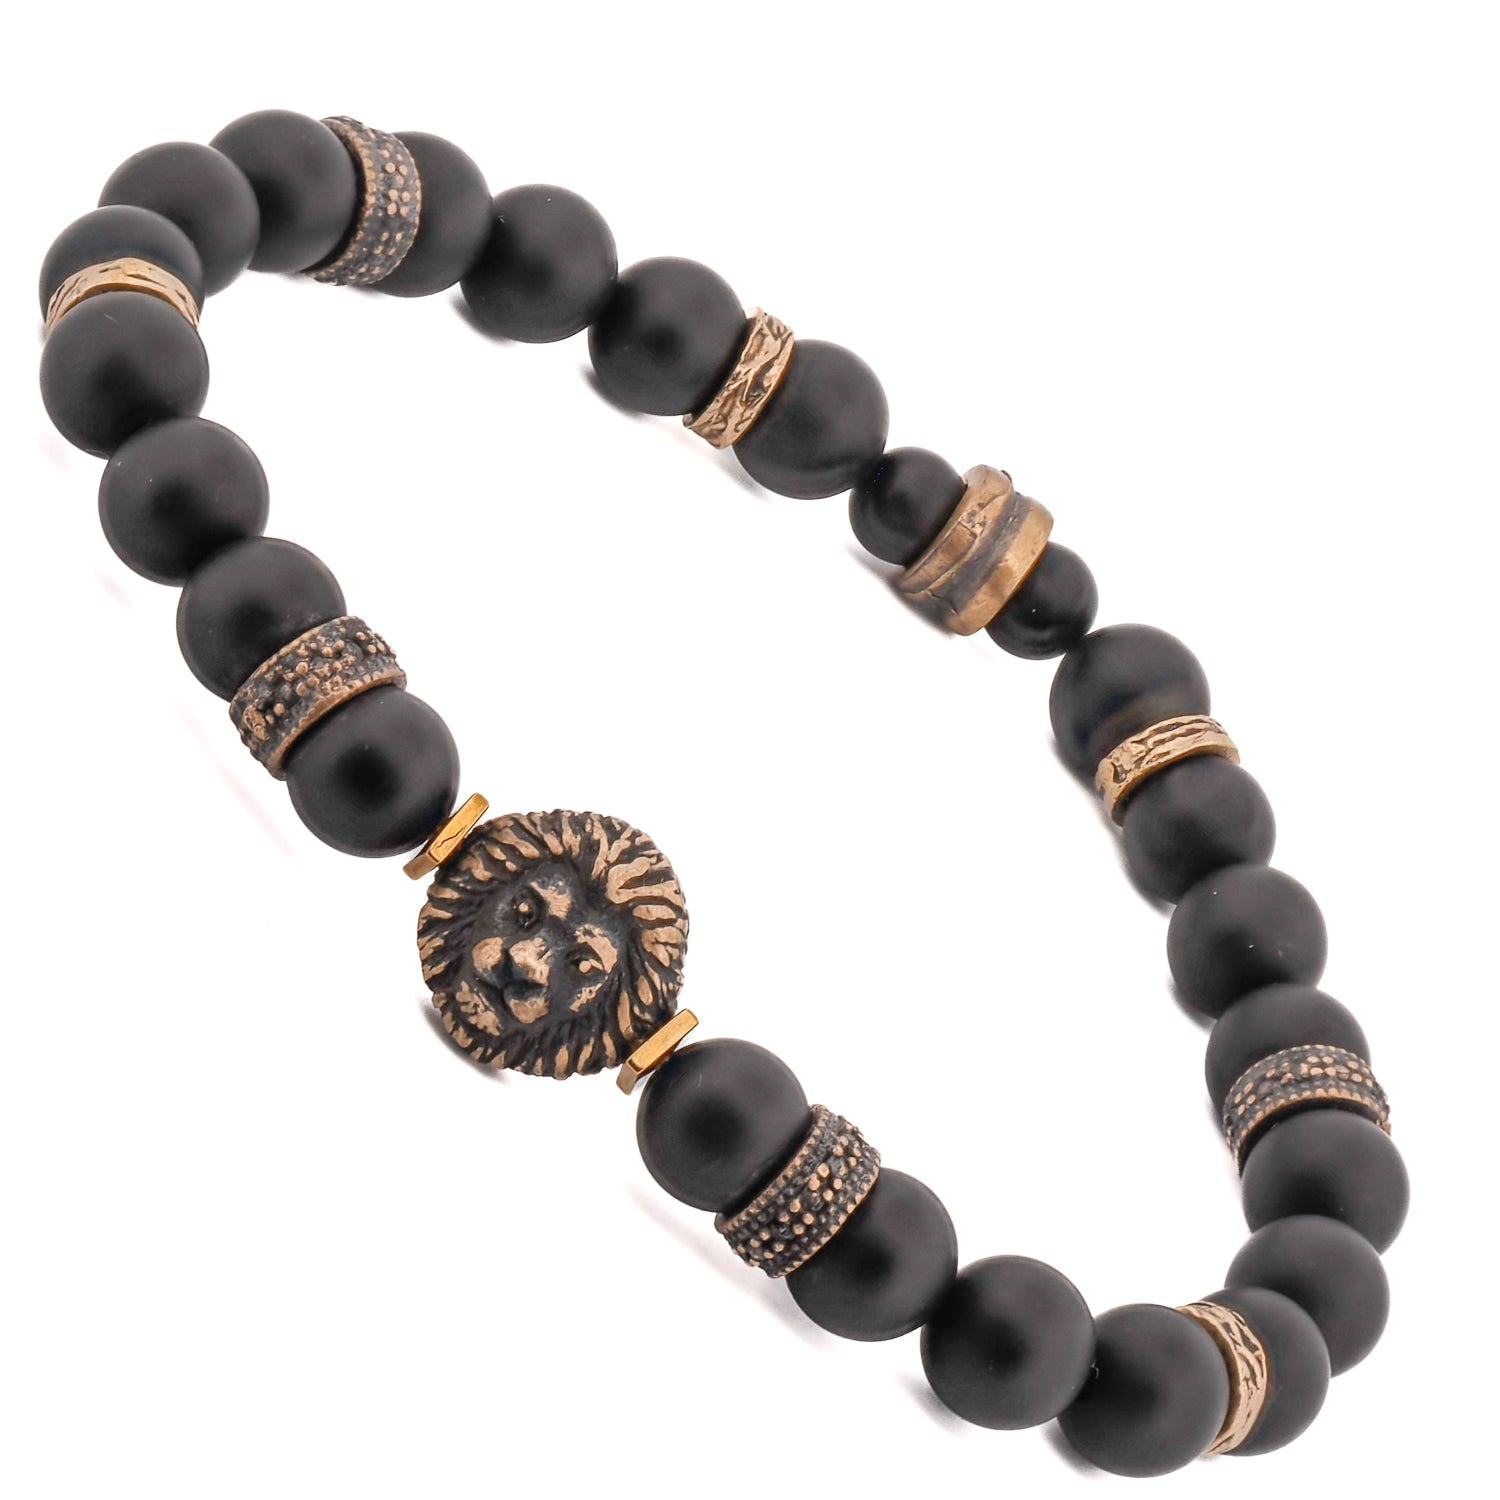 Handcrafted Matte Black Onyx Bracelet with a commanding bronze lion charm and gold hematite accents